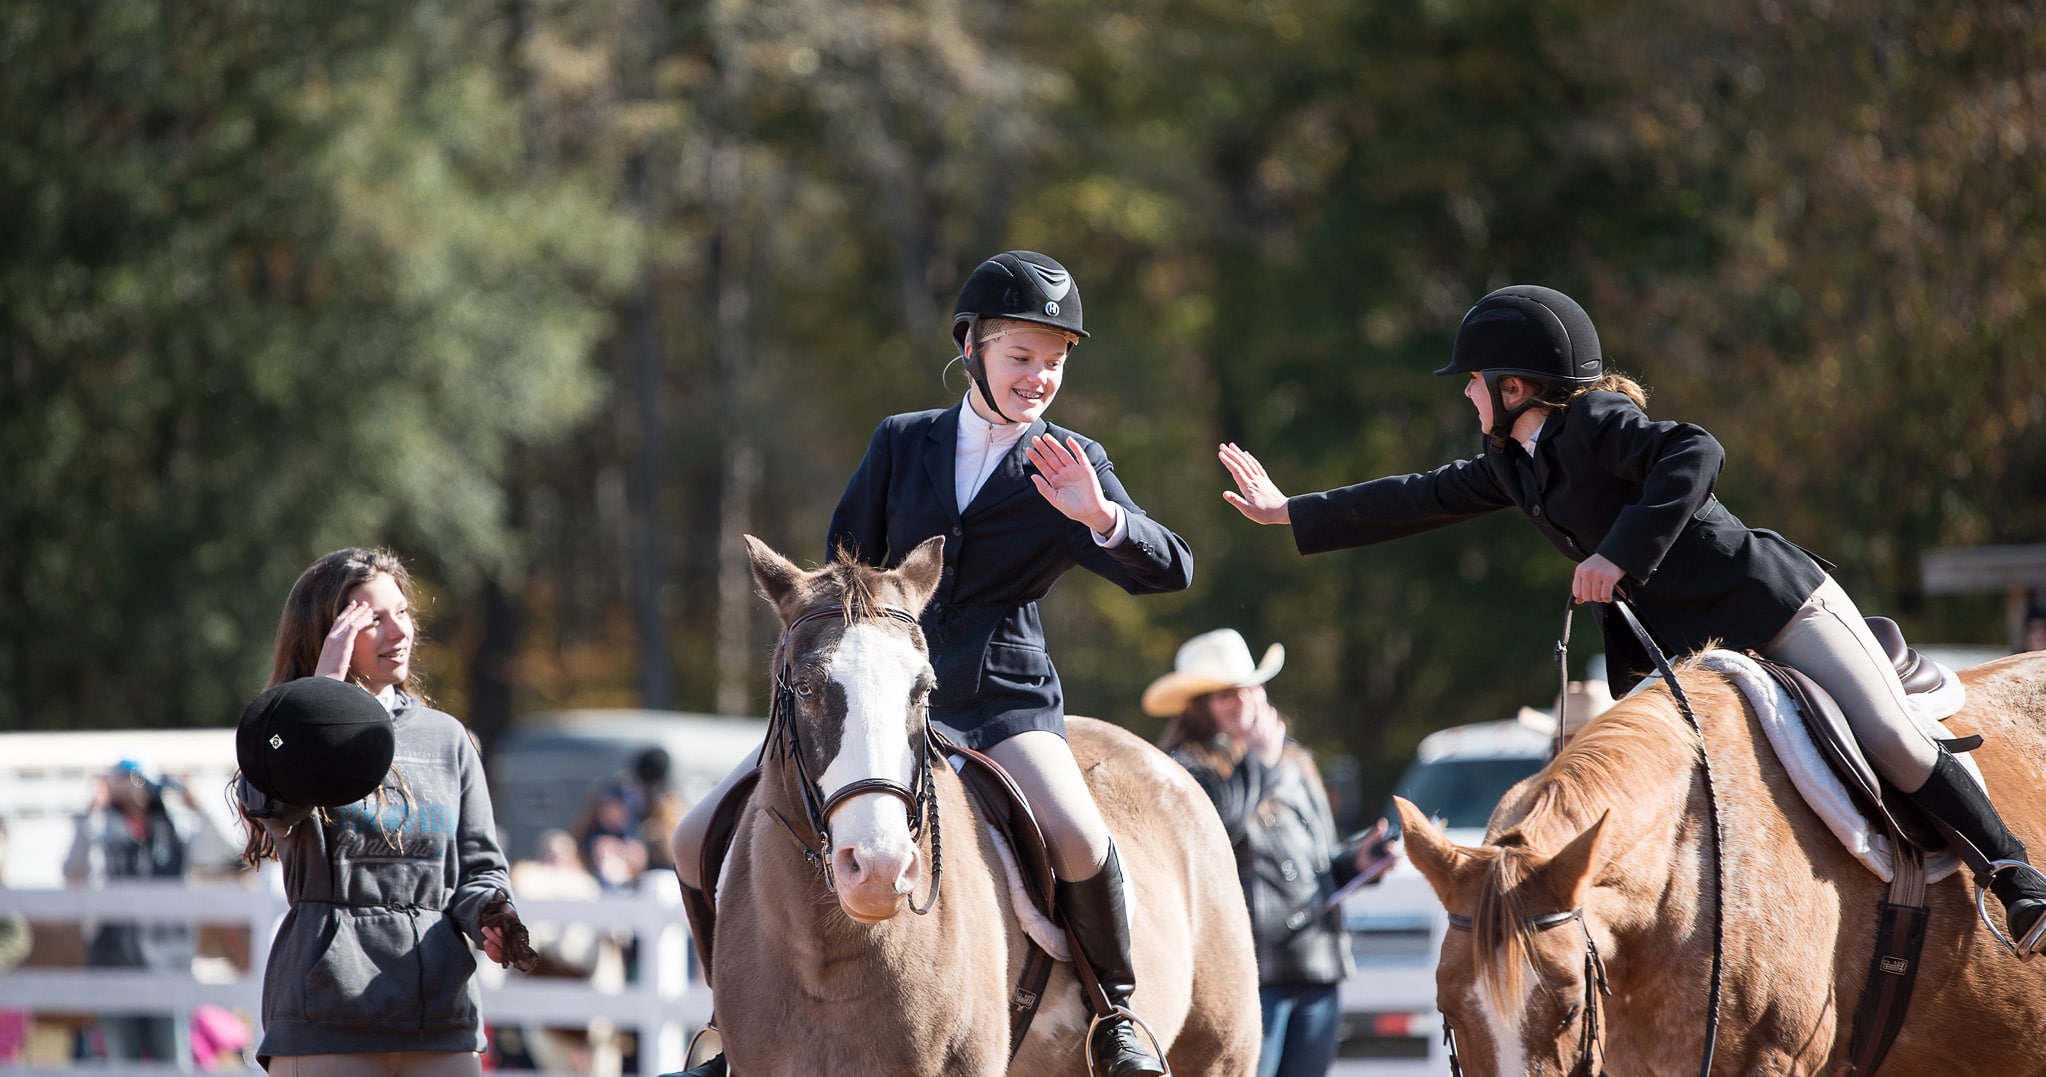 Girls giving high five at horse show